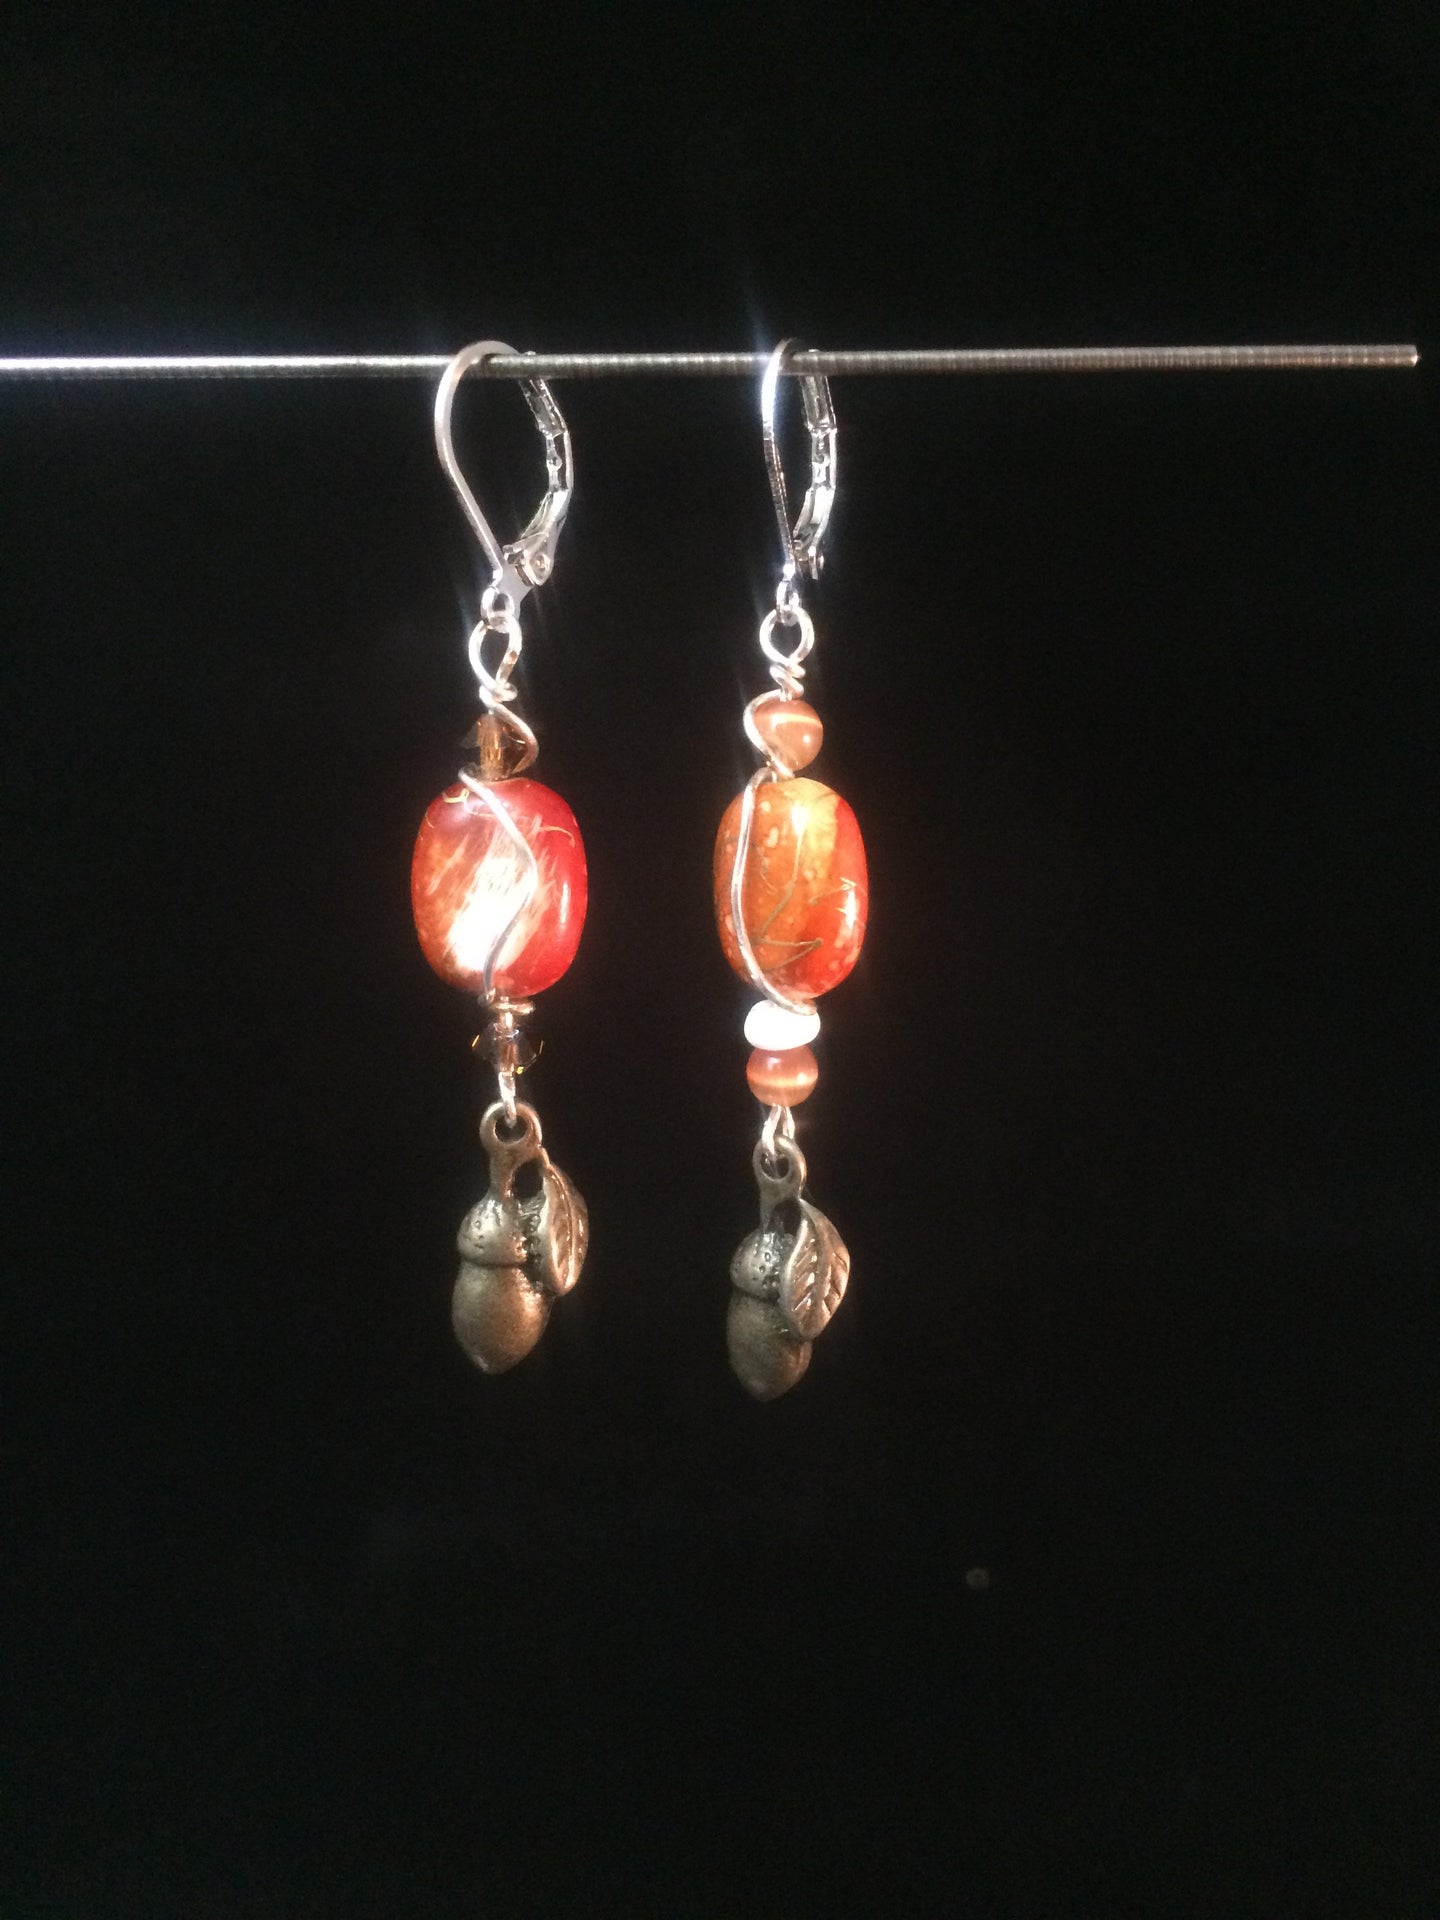 Leverback earrings made from glass beads and metal acorn charms.